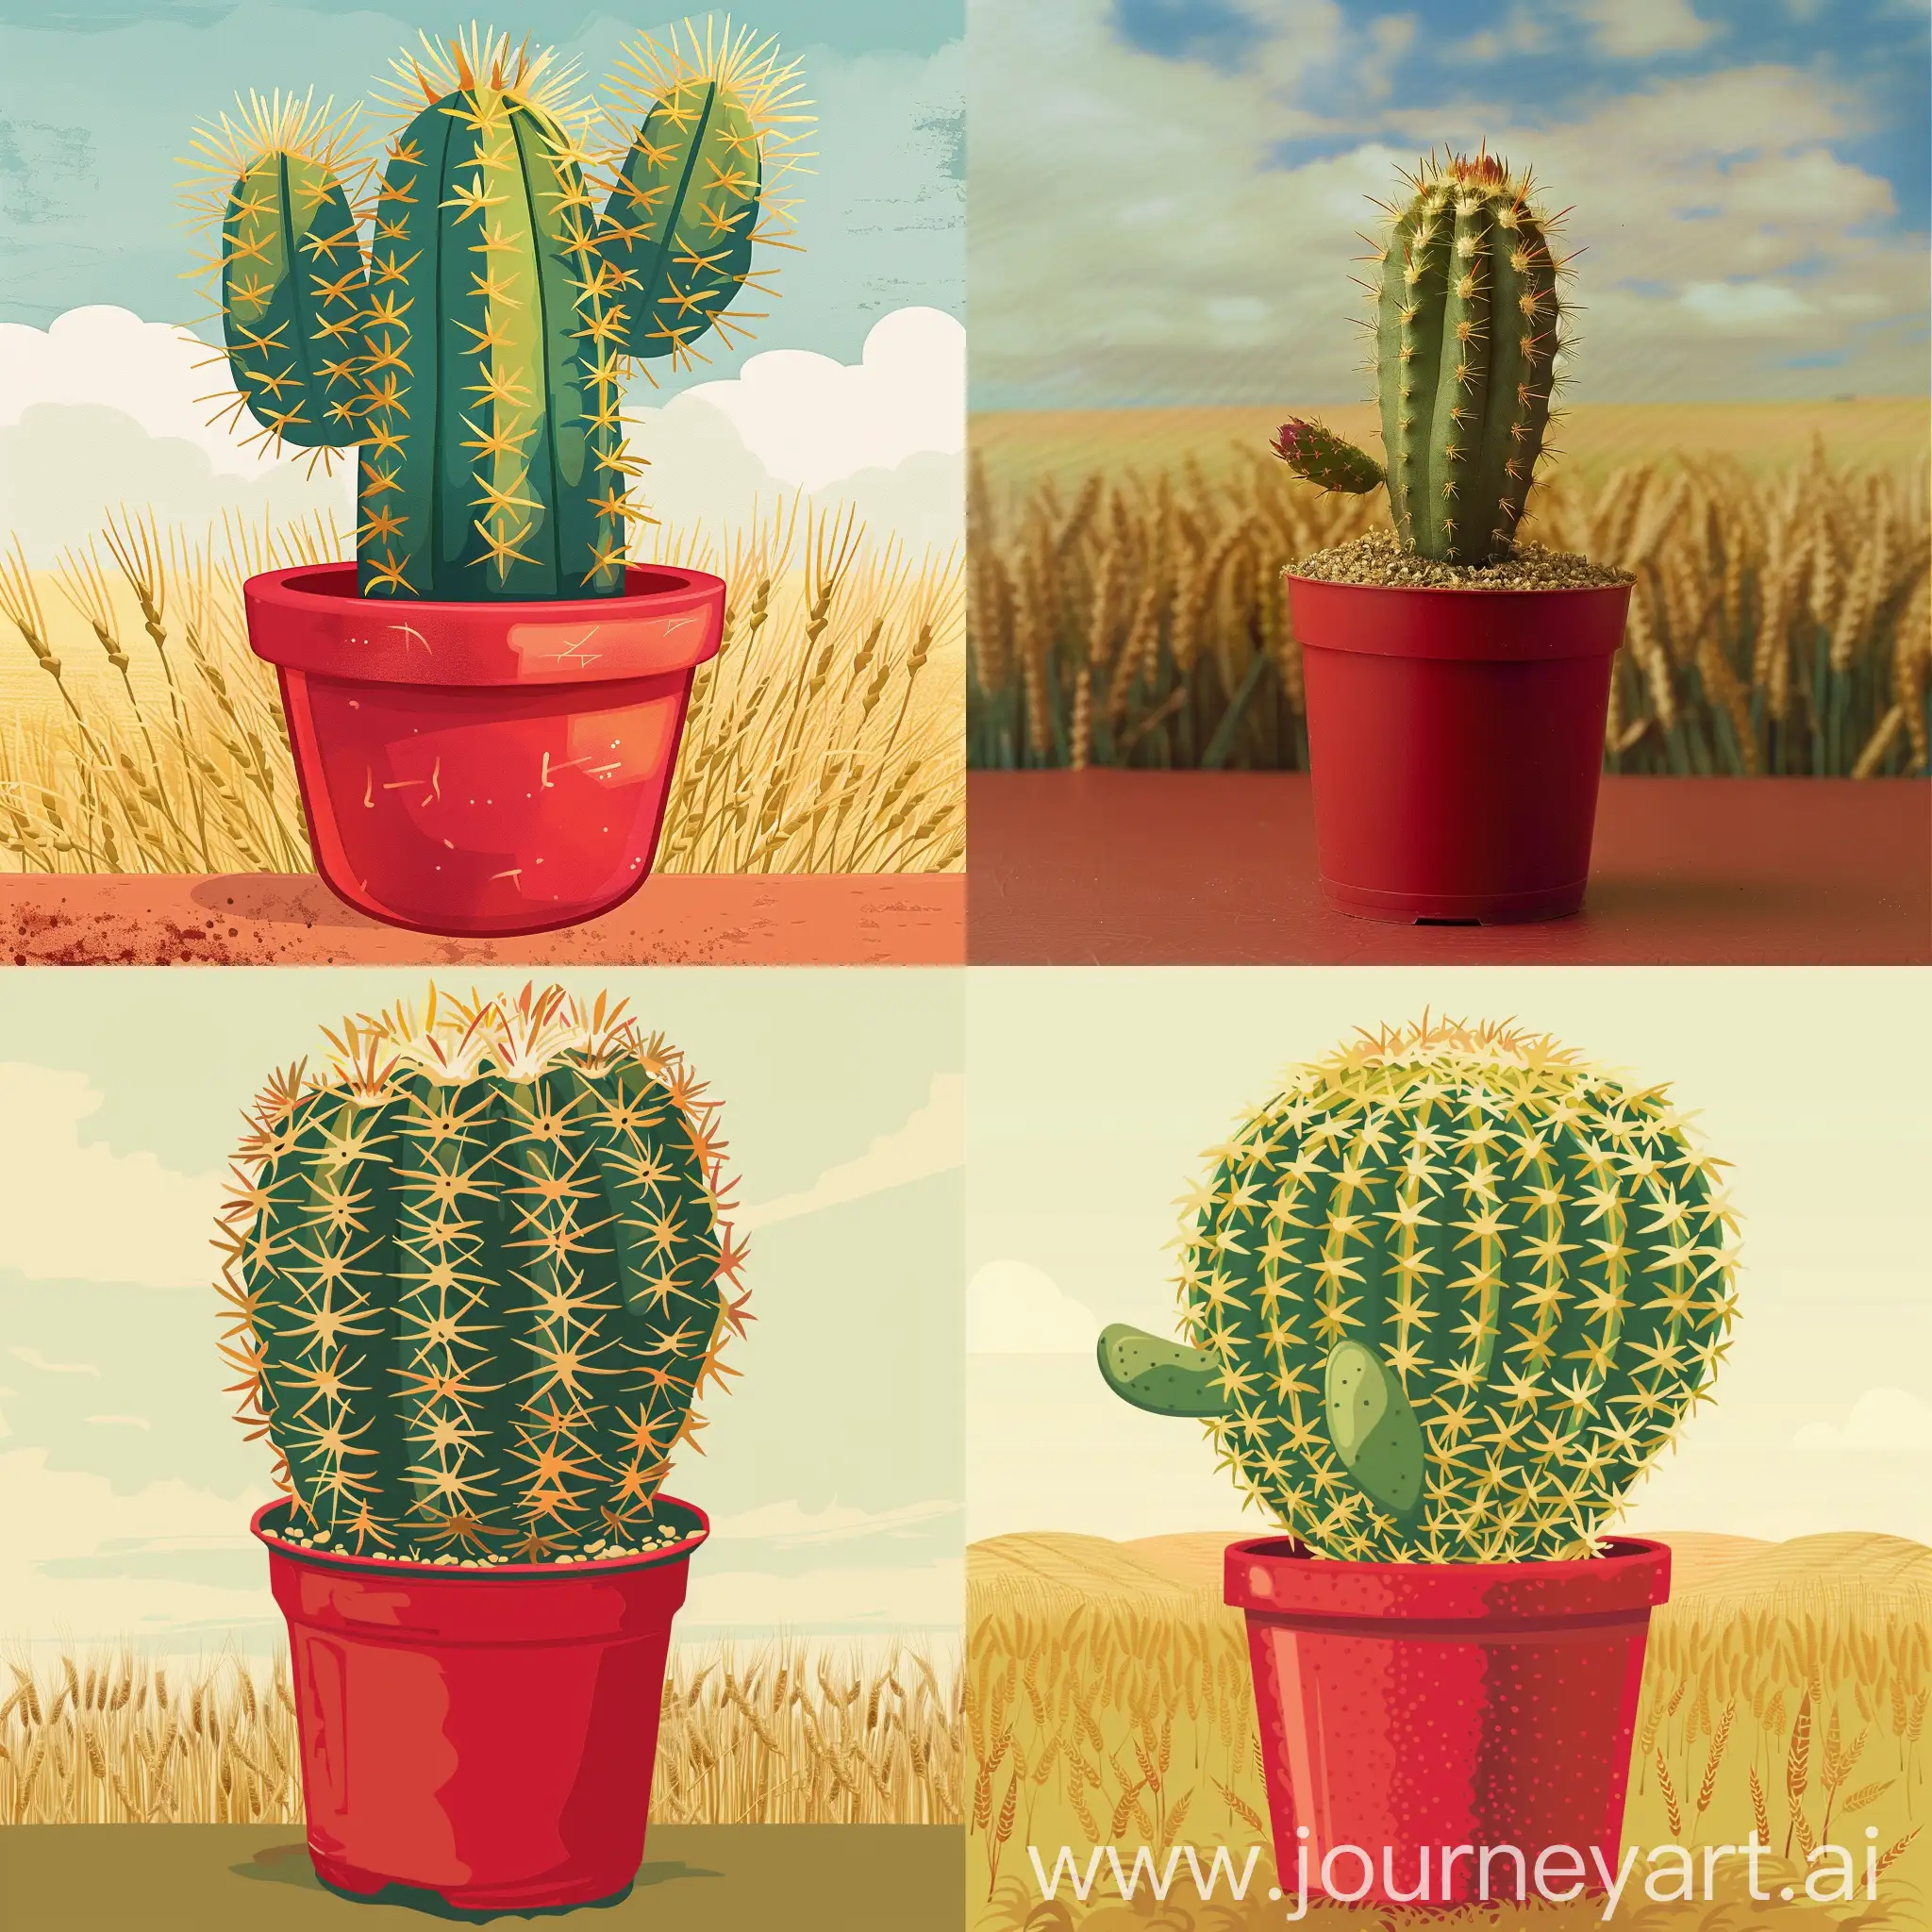 Cheerful-Cactus-in-Red-Pot-amid-Wheat-Fields